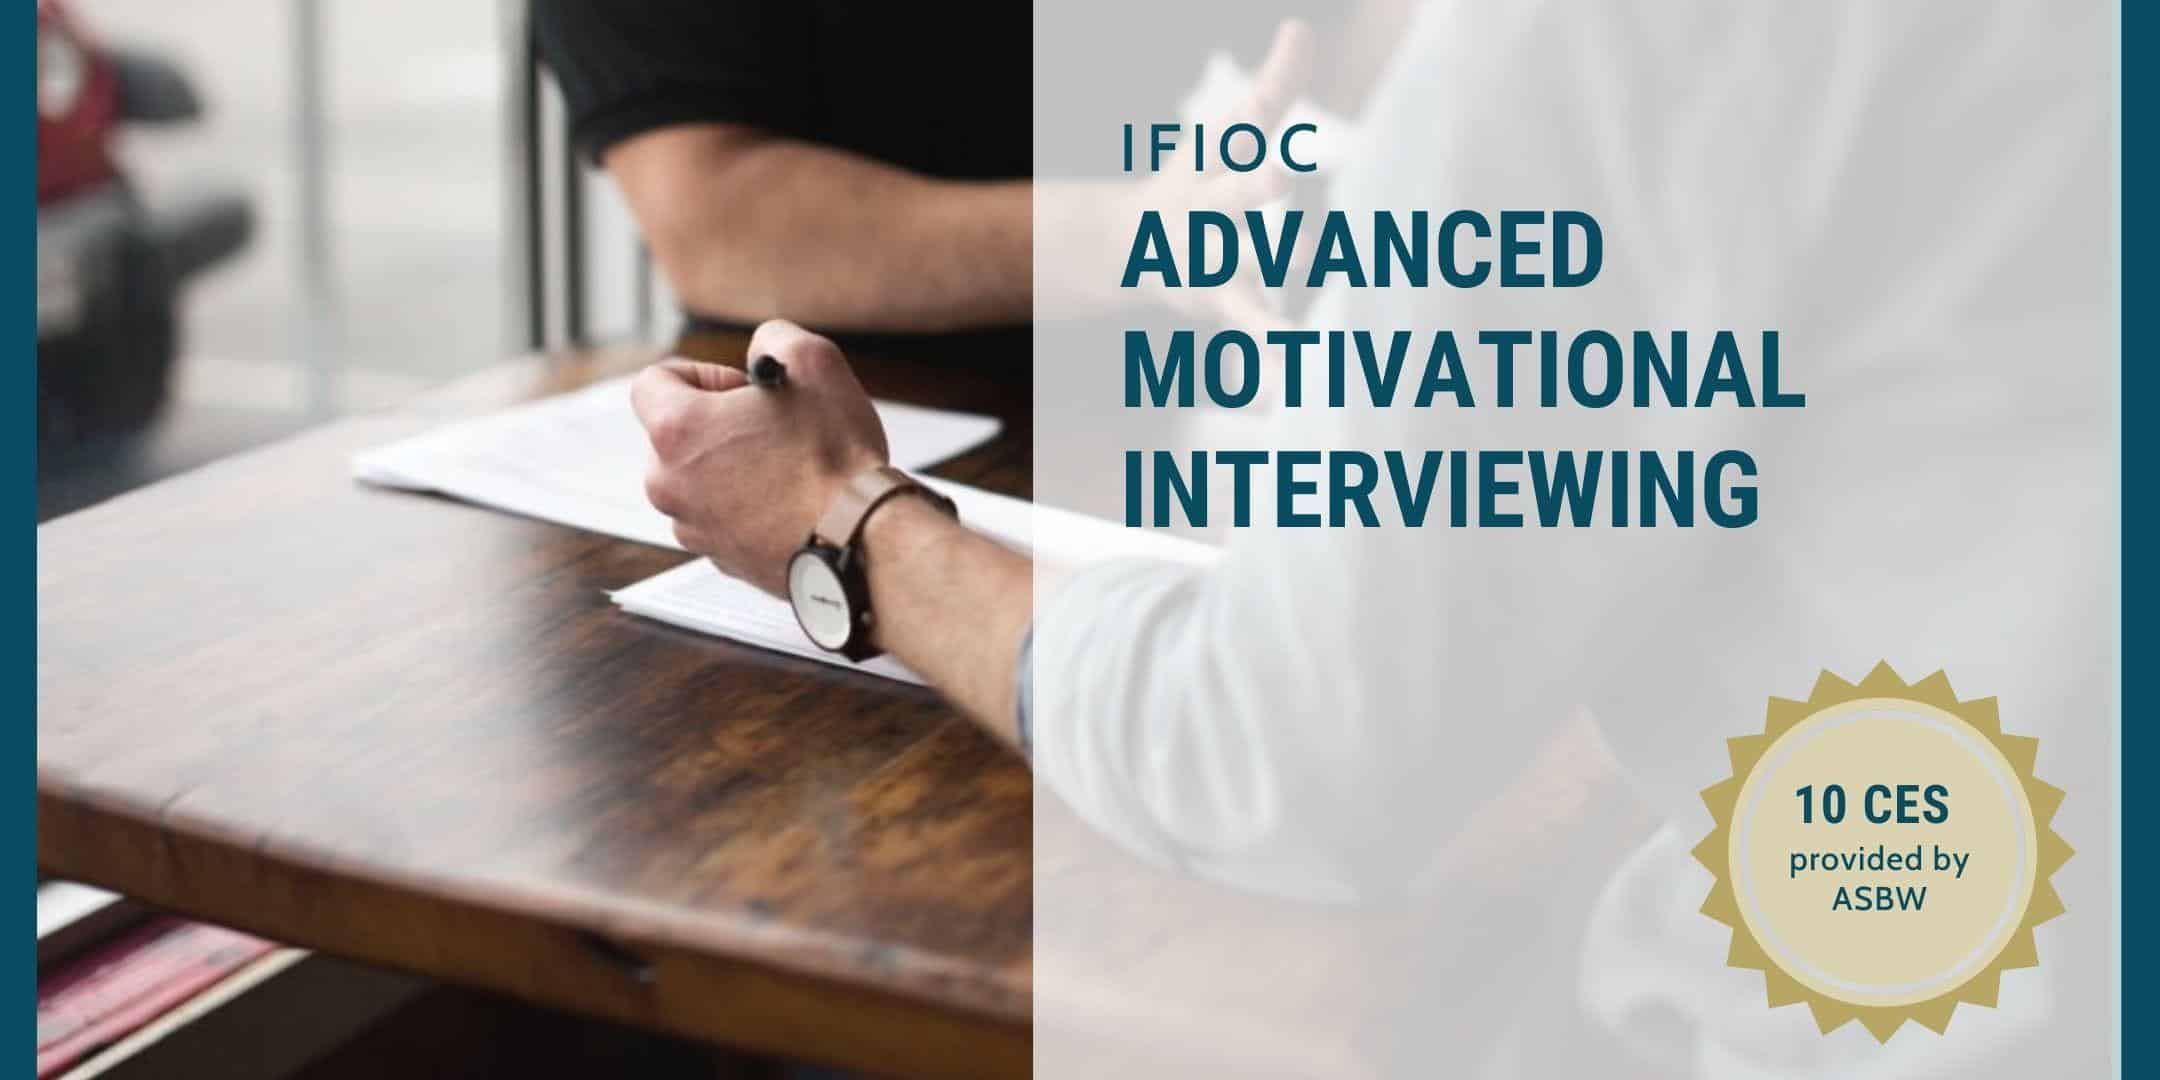 2 people sitting at table with a pen and paper, title of class IFIOC Advanced Motivational Interviewing, 10 CES provided by ASBW